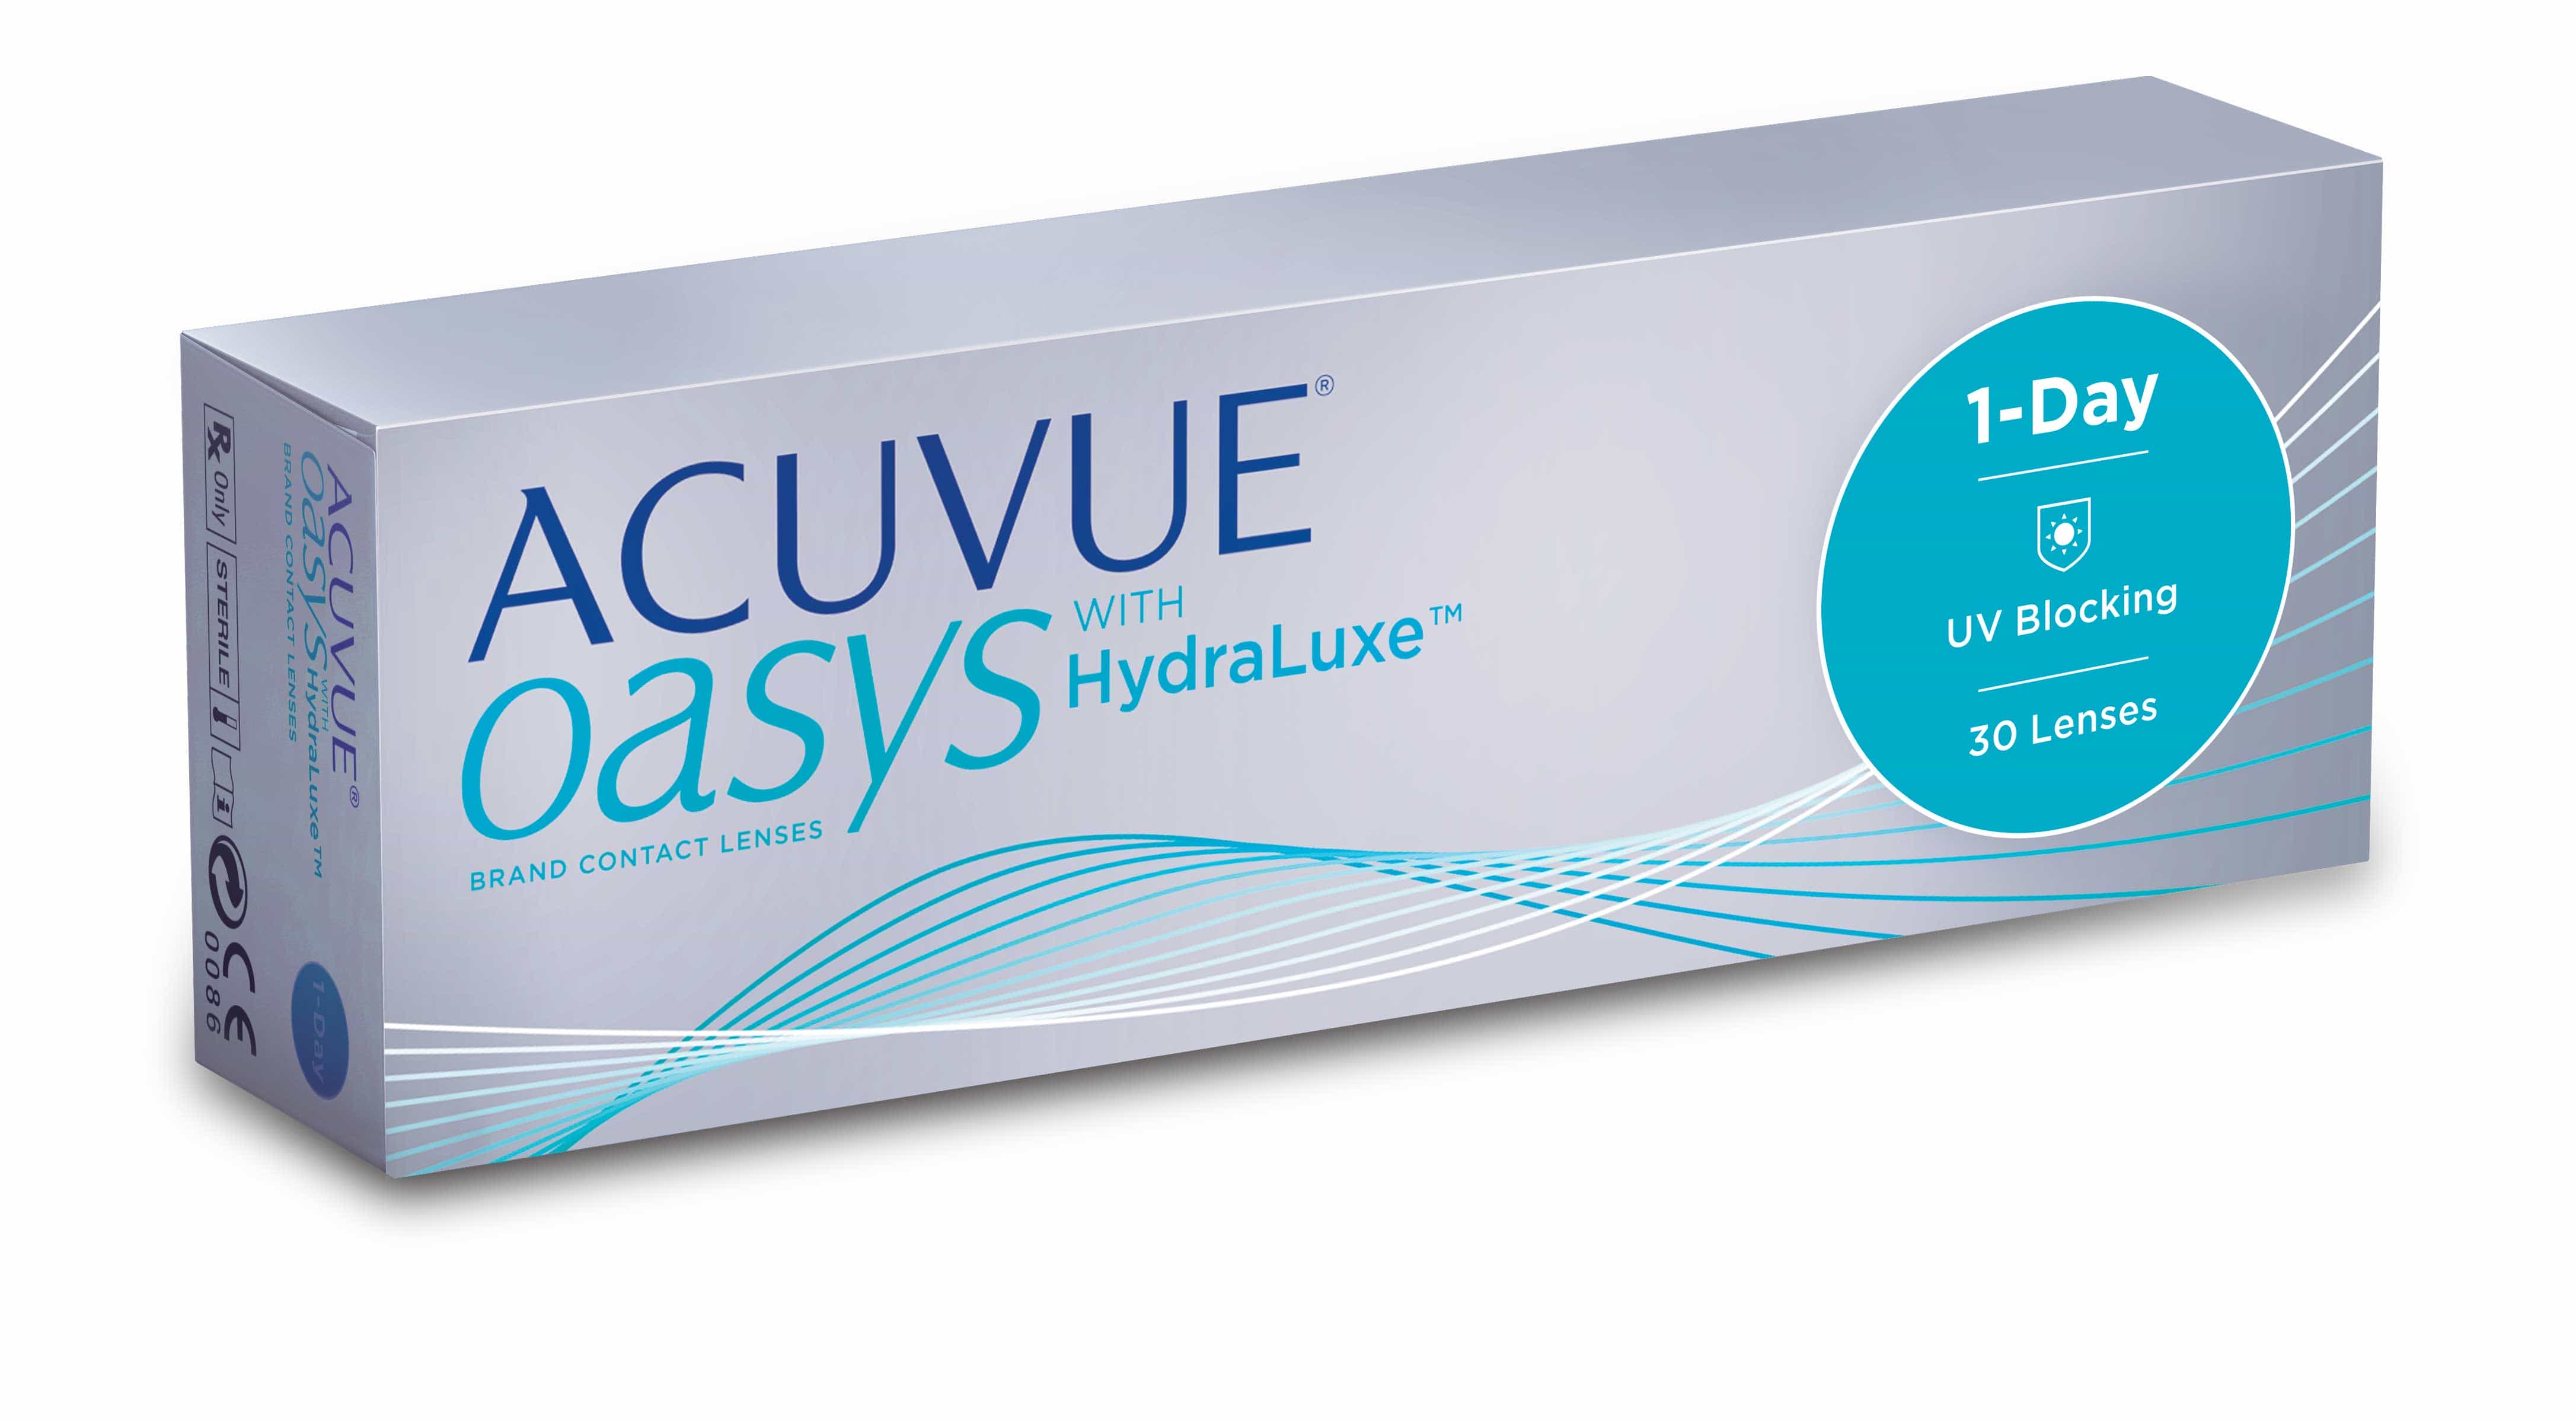 shop-for-1-day-acuvue-moist-30-pack-at-warby-parker-contacts-compare